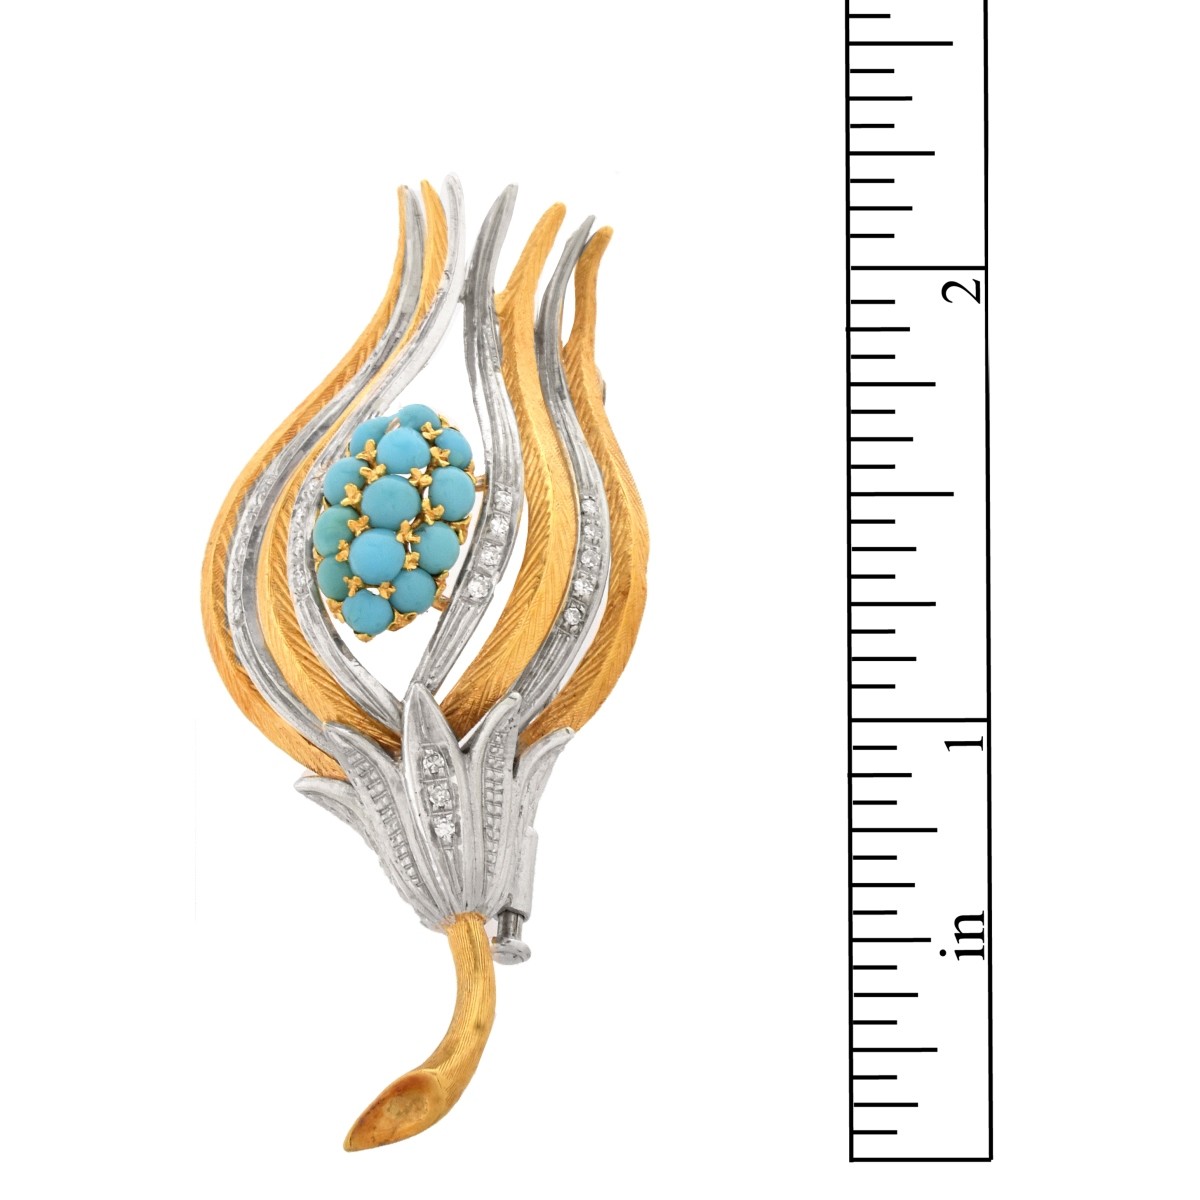 Diamond, Turquoise and 18K Flower Brooch